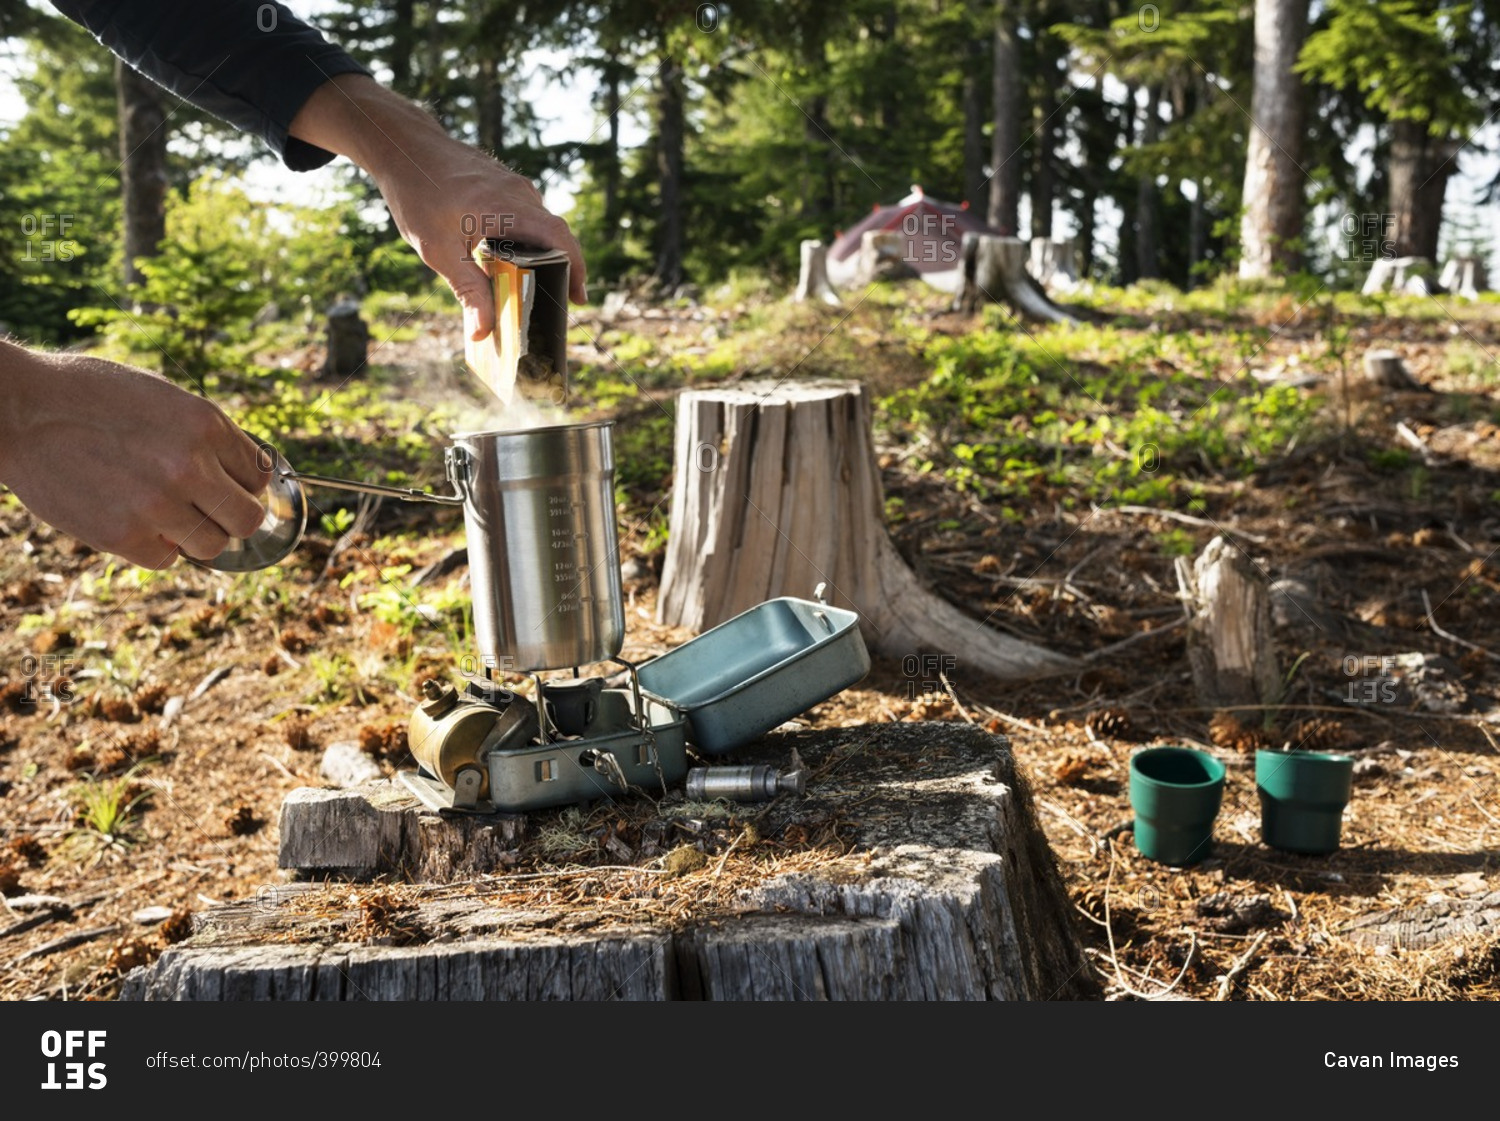 Cropped image of man pouring food in container over camping stove in forest